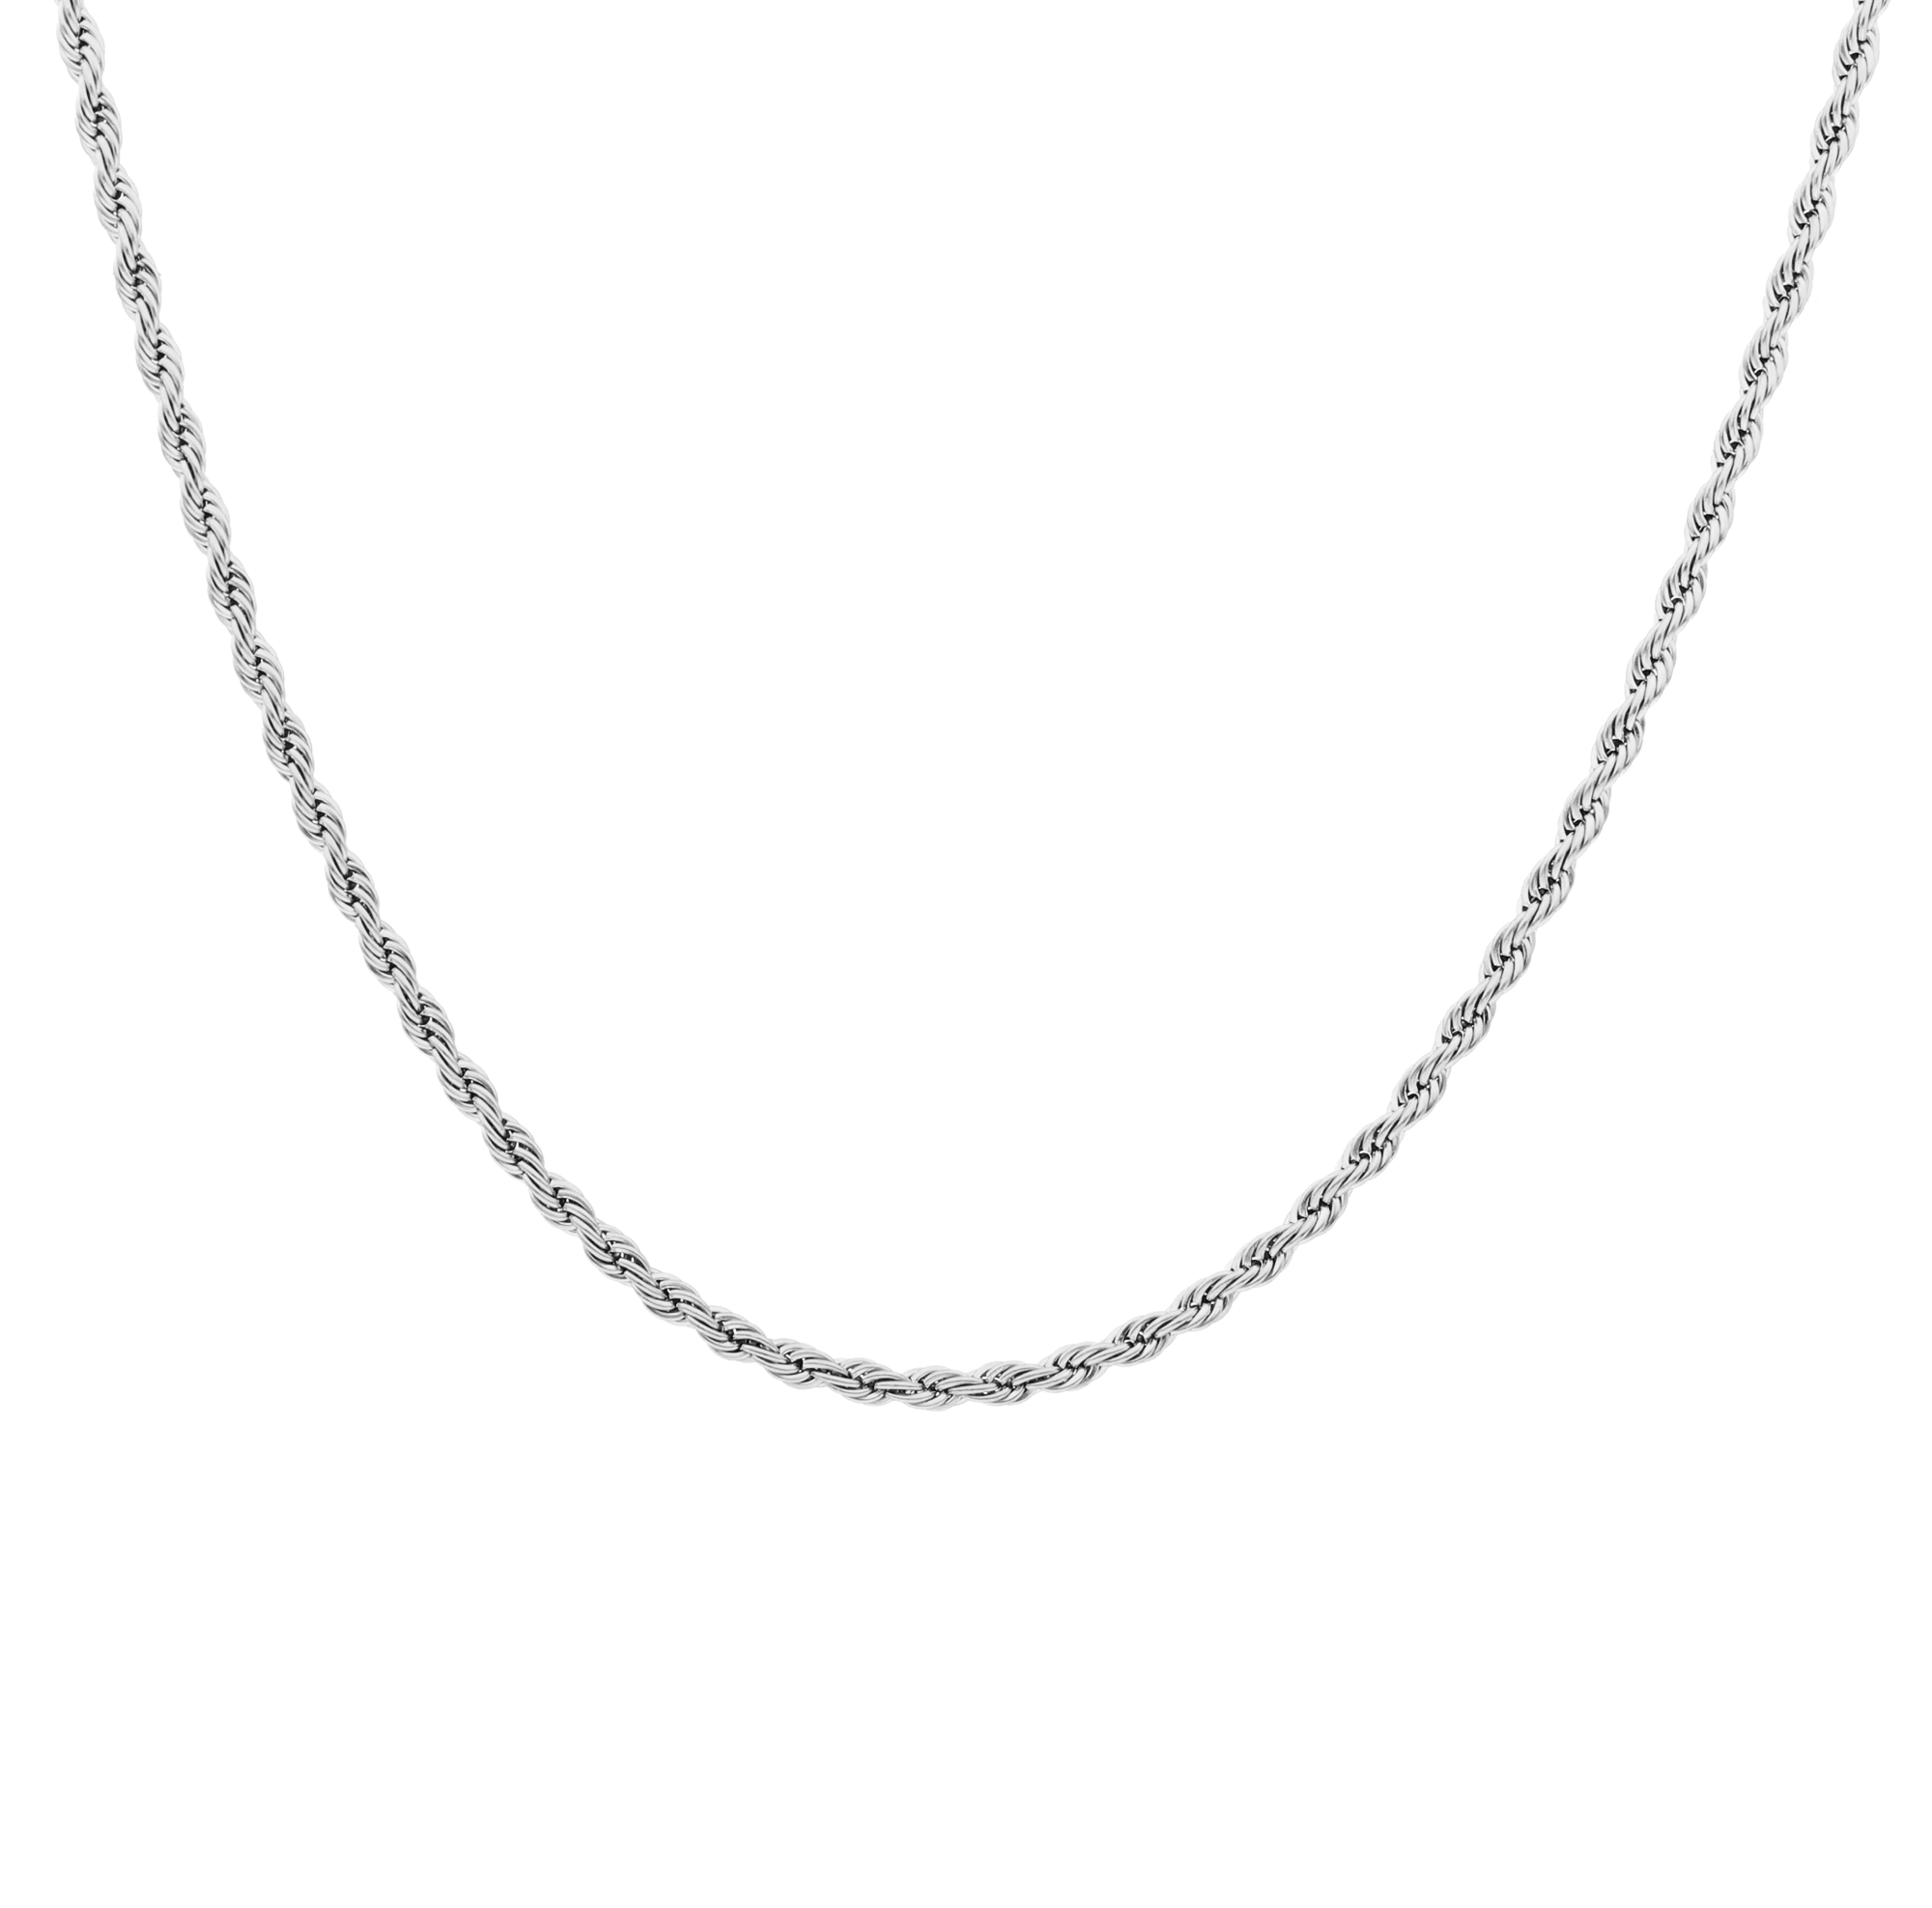 FJ Watches five jwlry jewel jewelry baby don necklace collier French rope twisted chain chaine torsadé corde silver argent men homme thin mince 2.5mm acier inoxydable stainless steel water resistant résistant eau montreal canada design